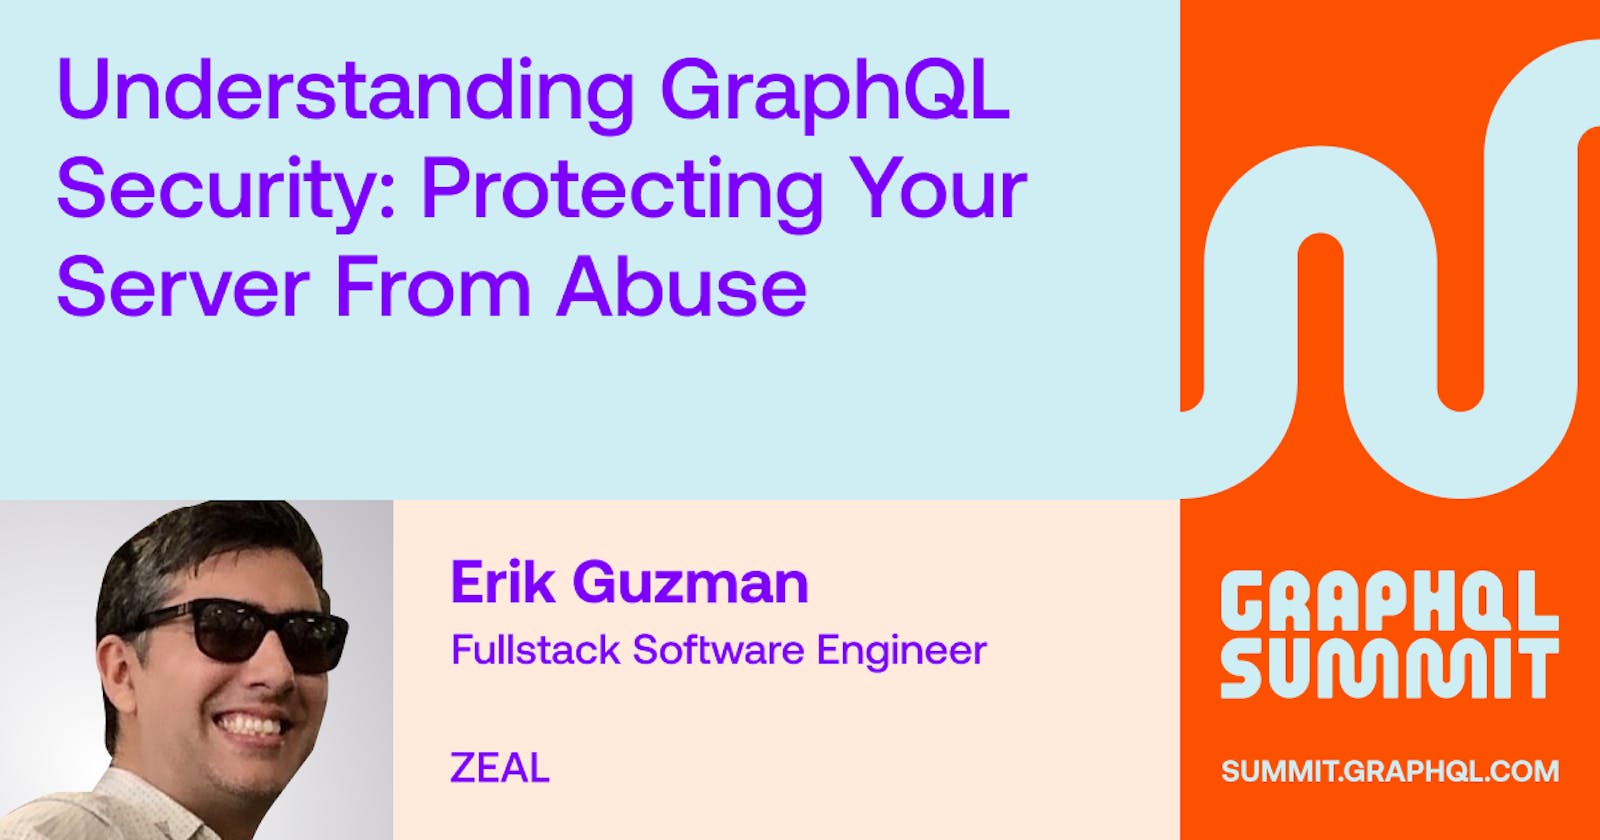 "Understanding GraphQL Security: Protecting Your Server from Abuse" Resources